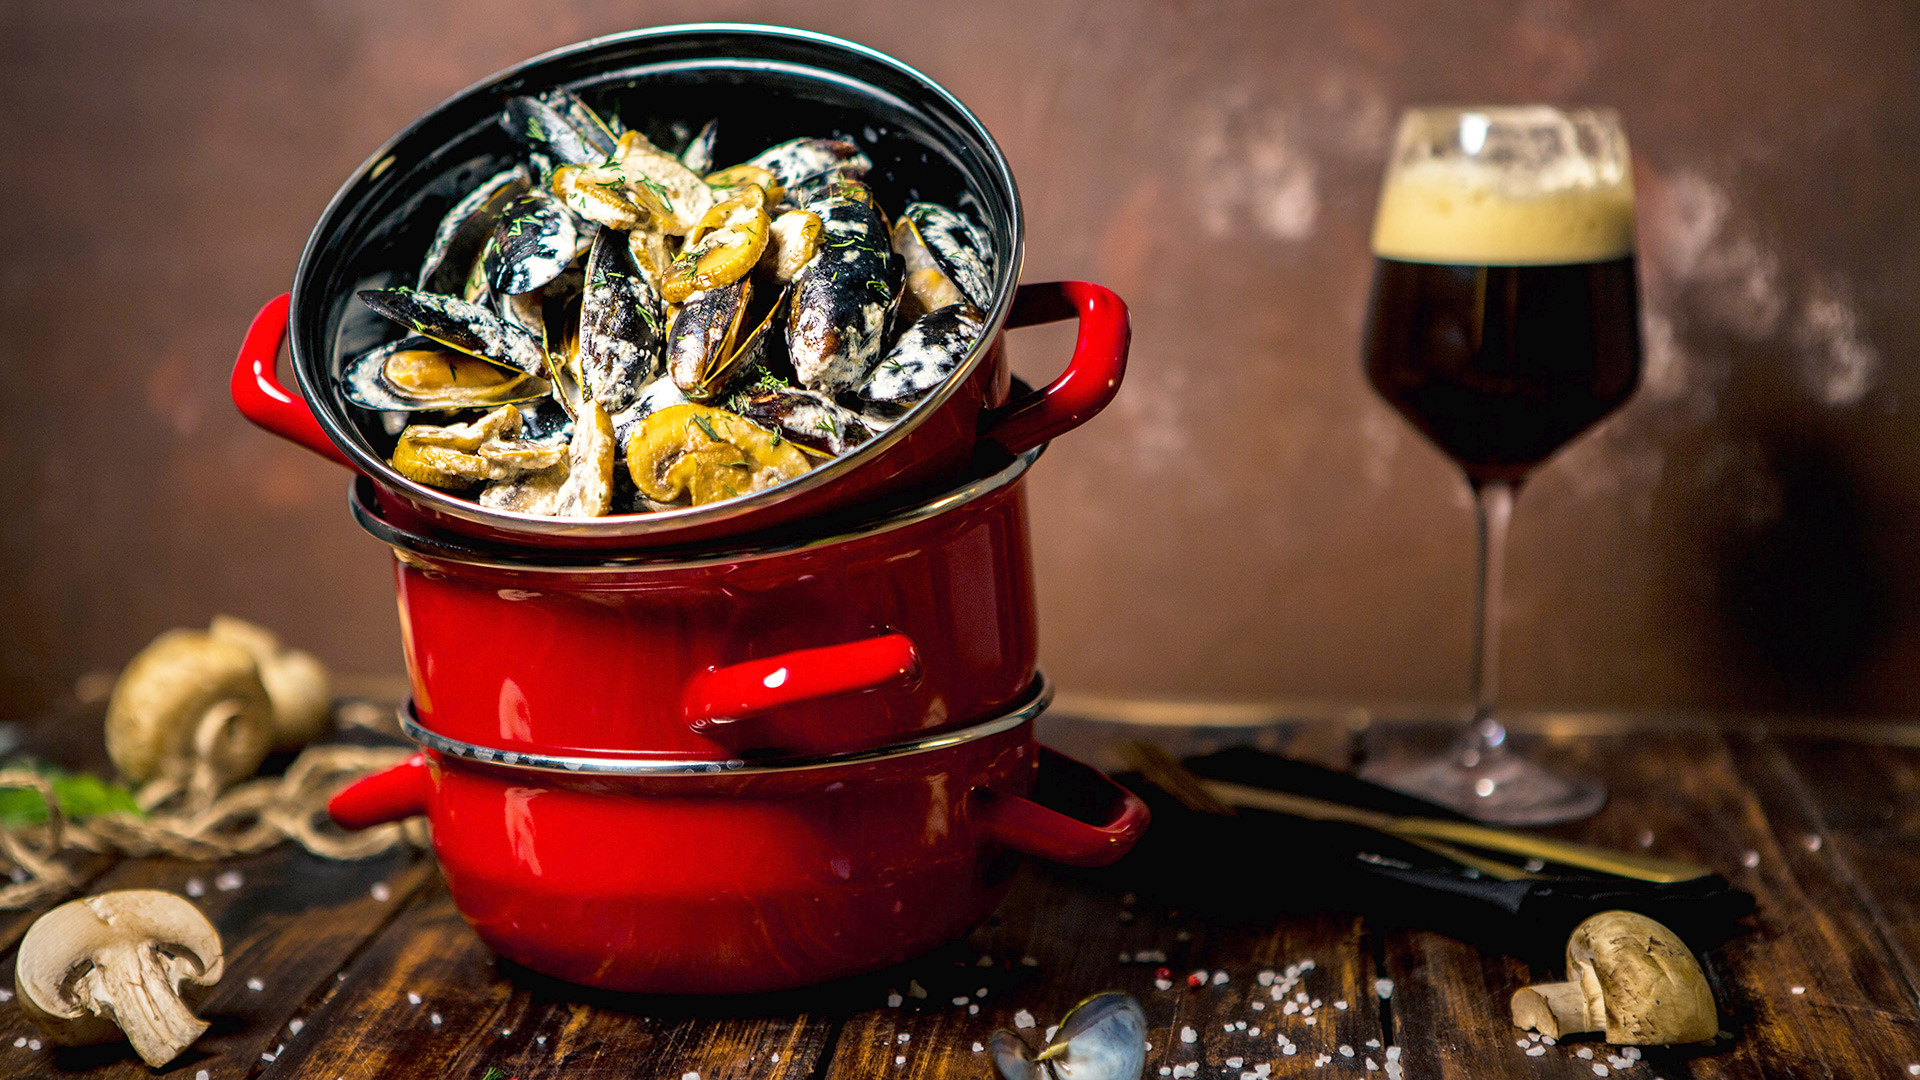 You’ll find mussels in 33 different sauces in Mollusca